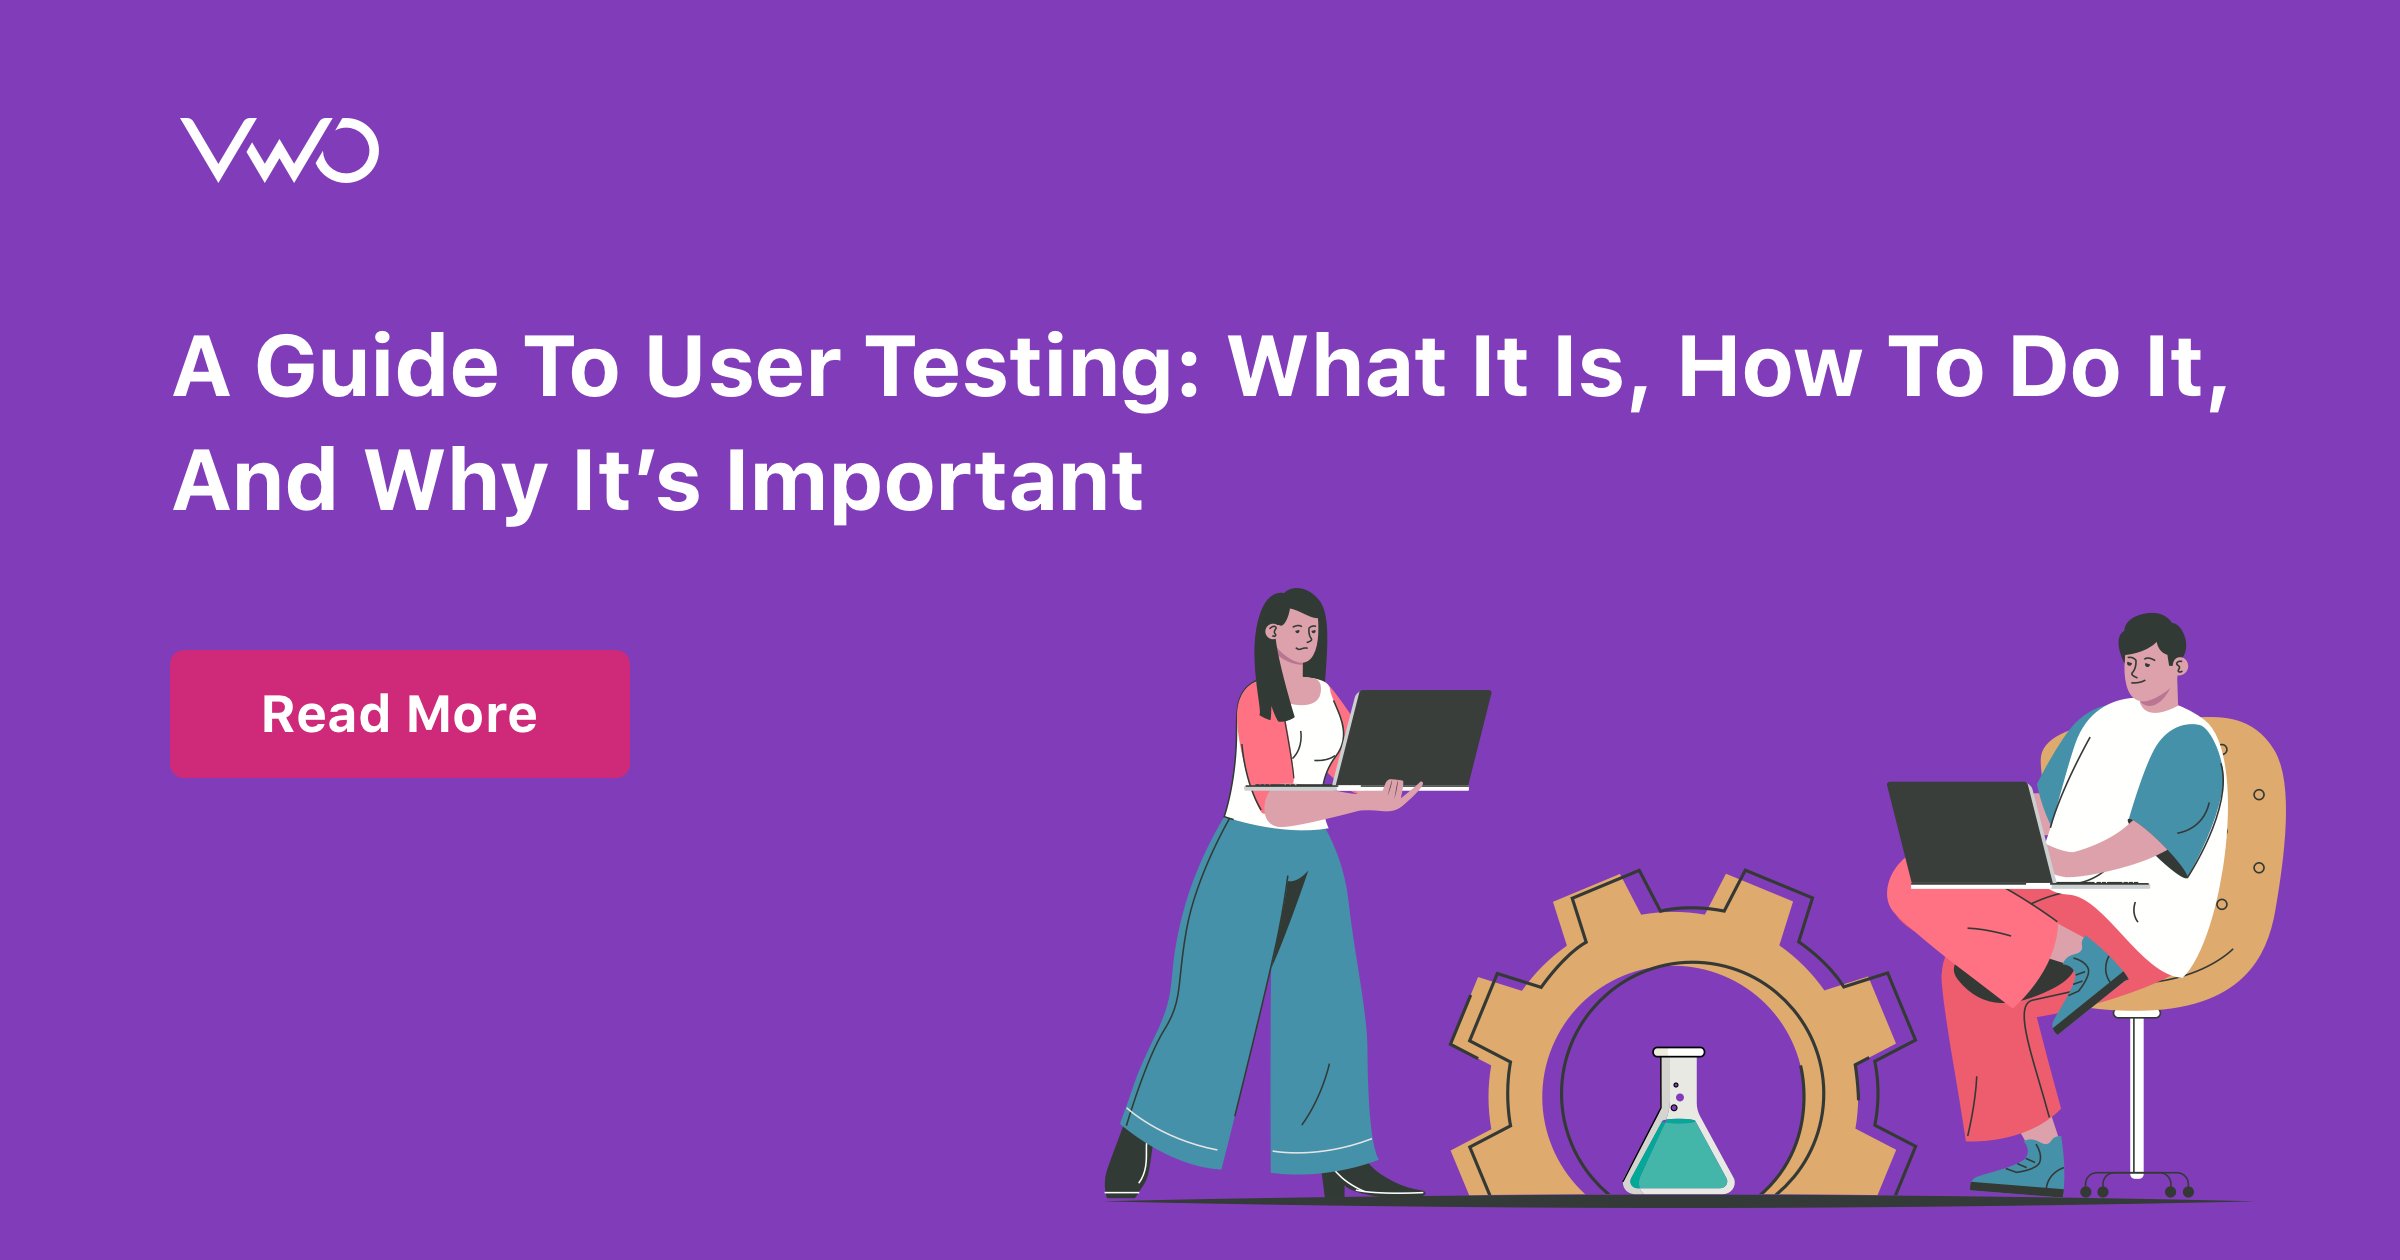 a-guide-to-user-testing-what-it-is-how-to-do-it-and-why-it-s